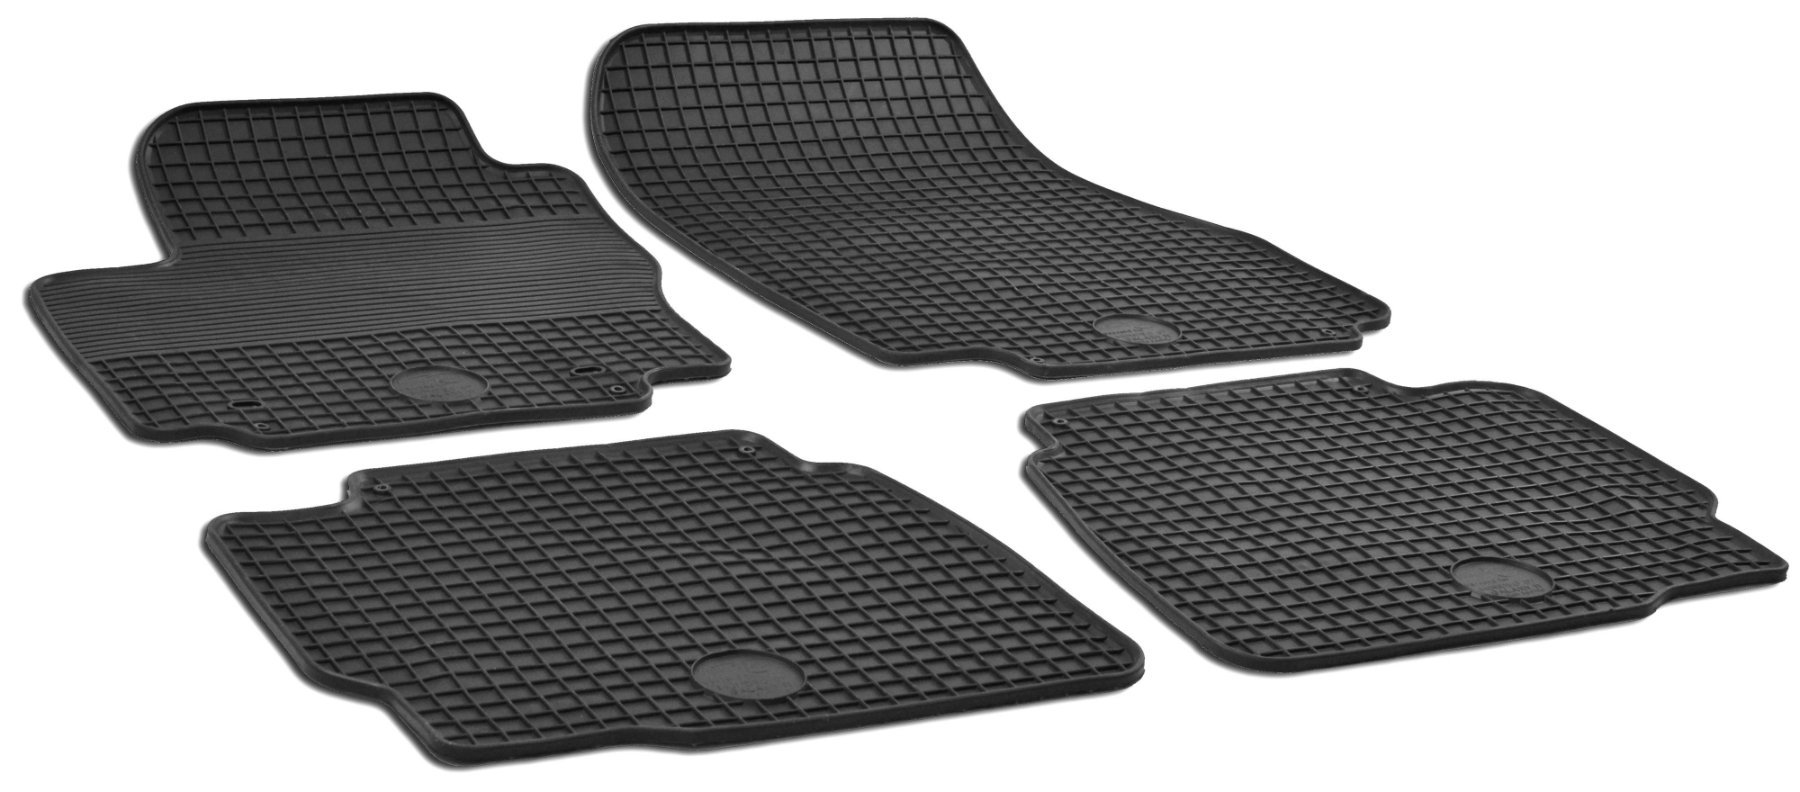 Tapis en caoutchouc RubberLine pour Ford S-Max 2006-2014, Ford Galaxy 2010-2015, Ford Mondeo 2007-2015